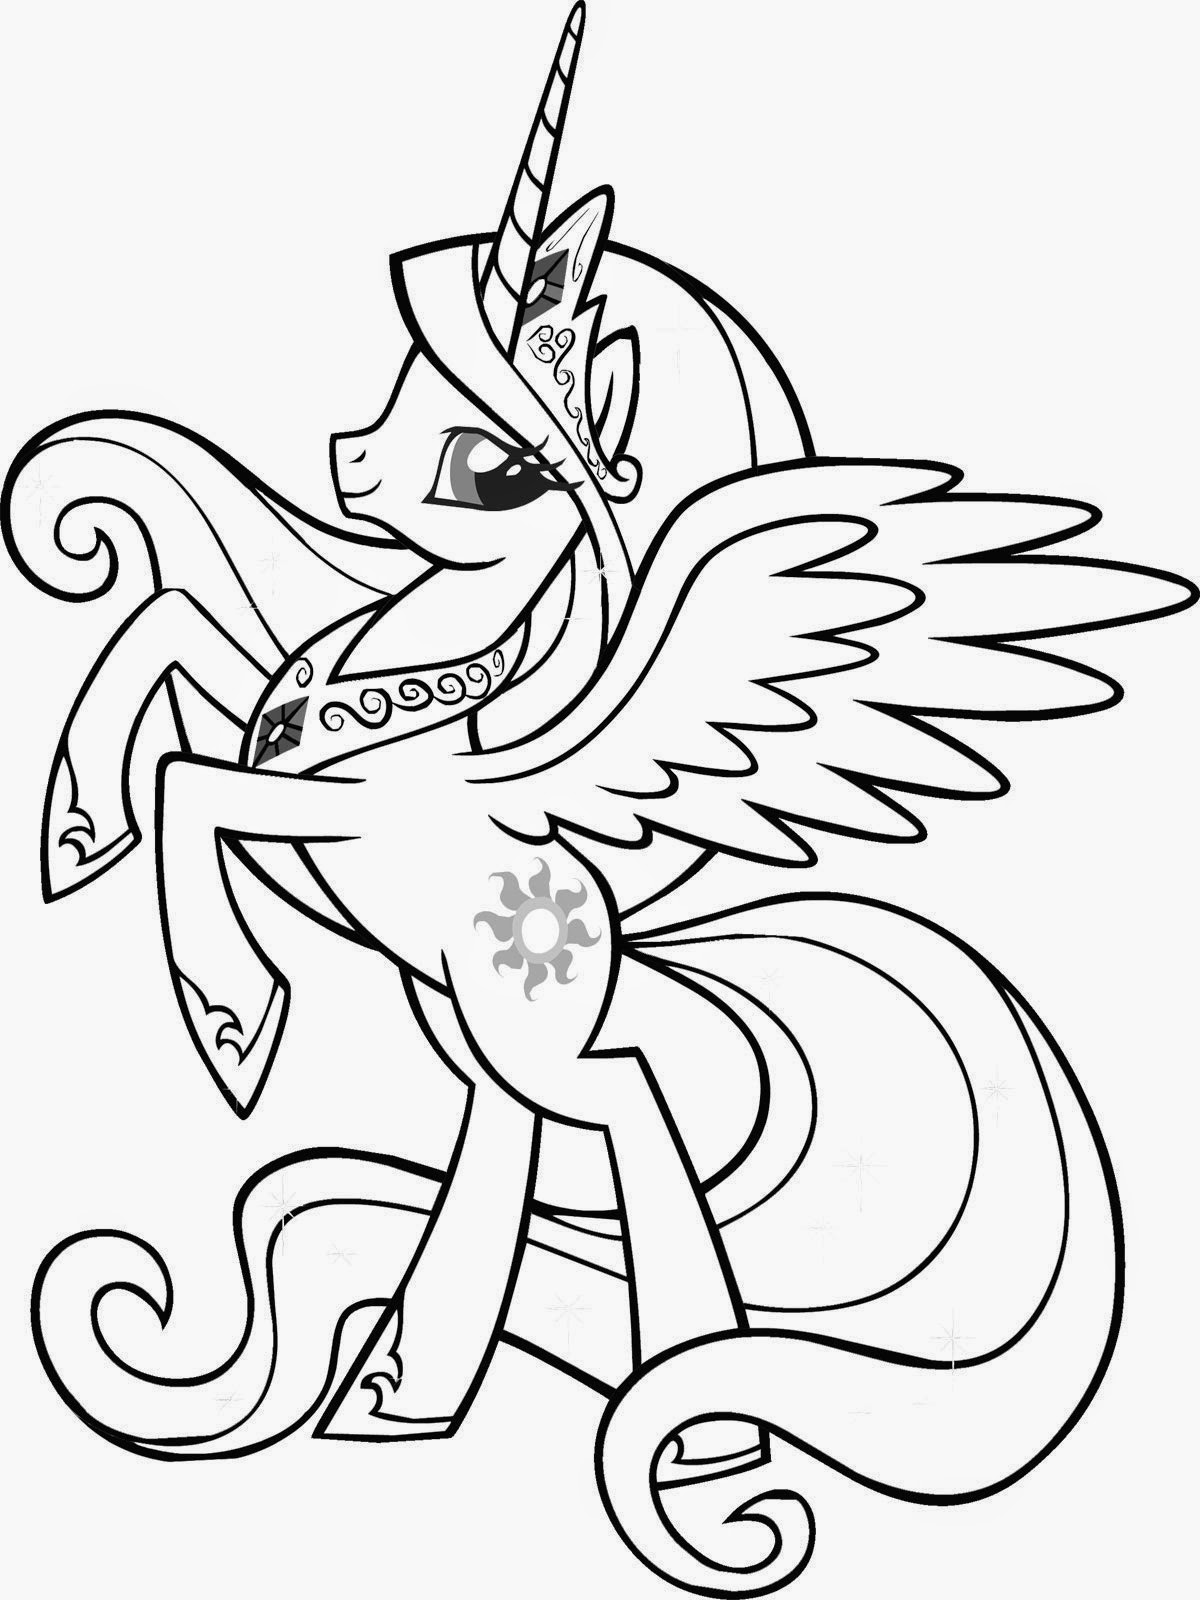 Coloring Pages: My Little Pony Coloring Pages Free and ...